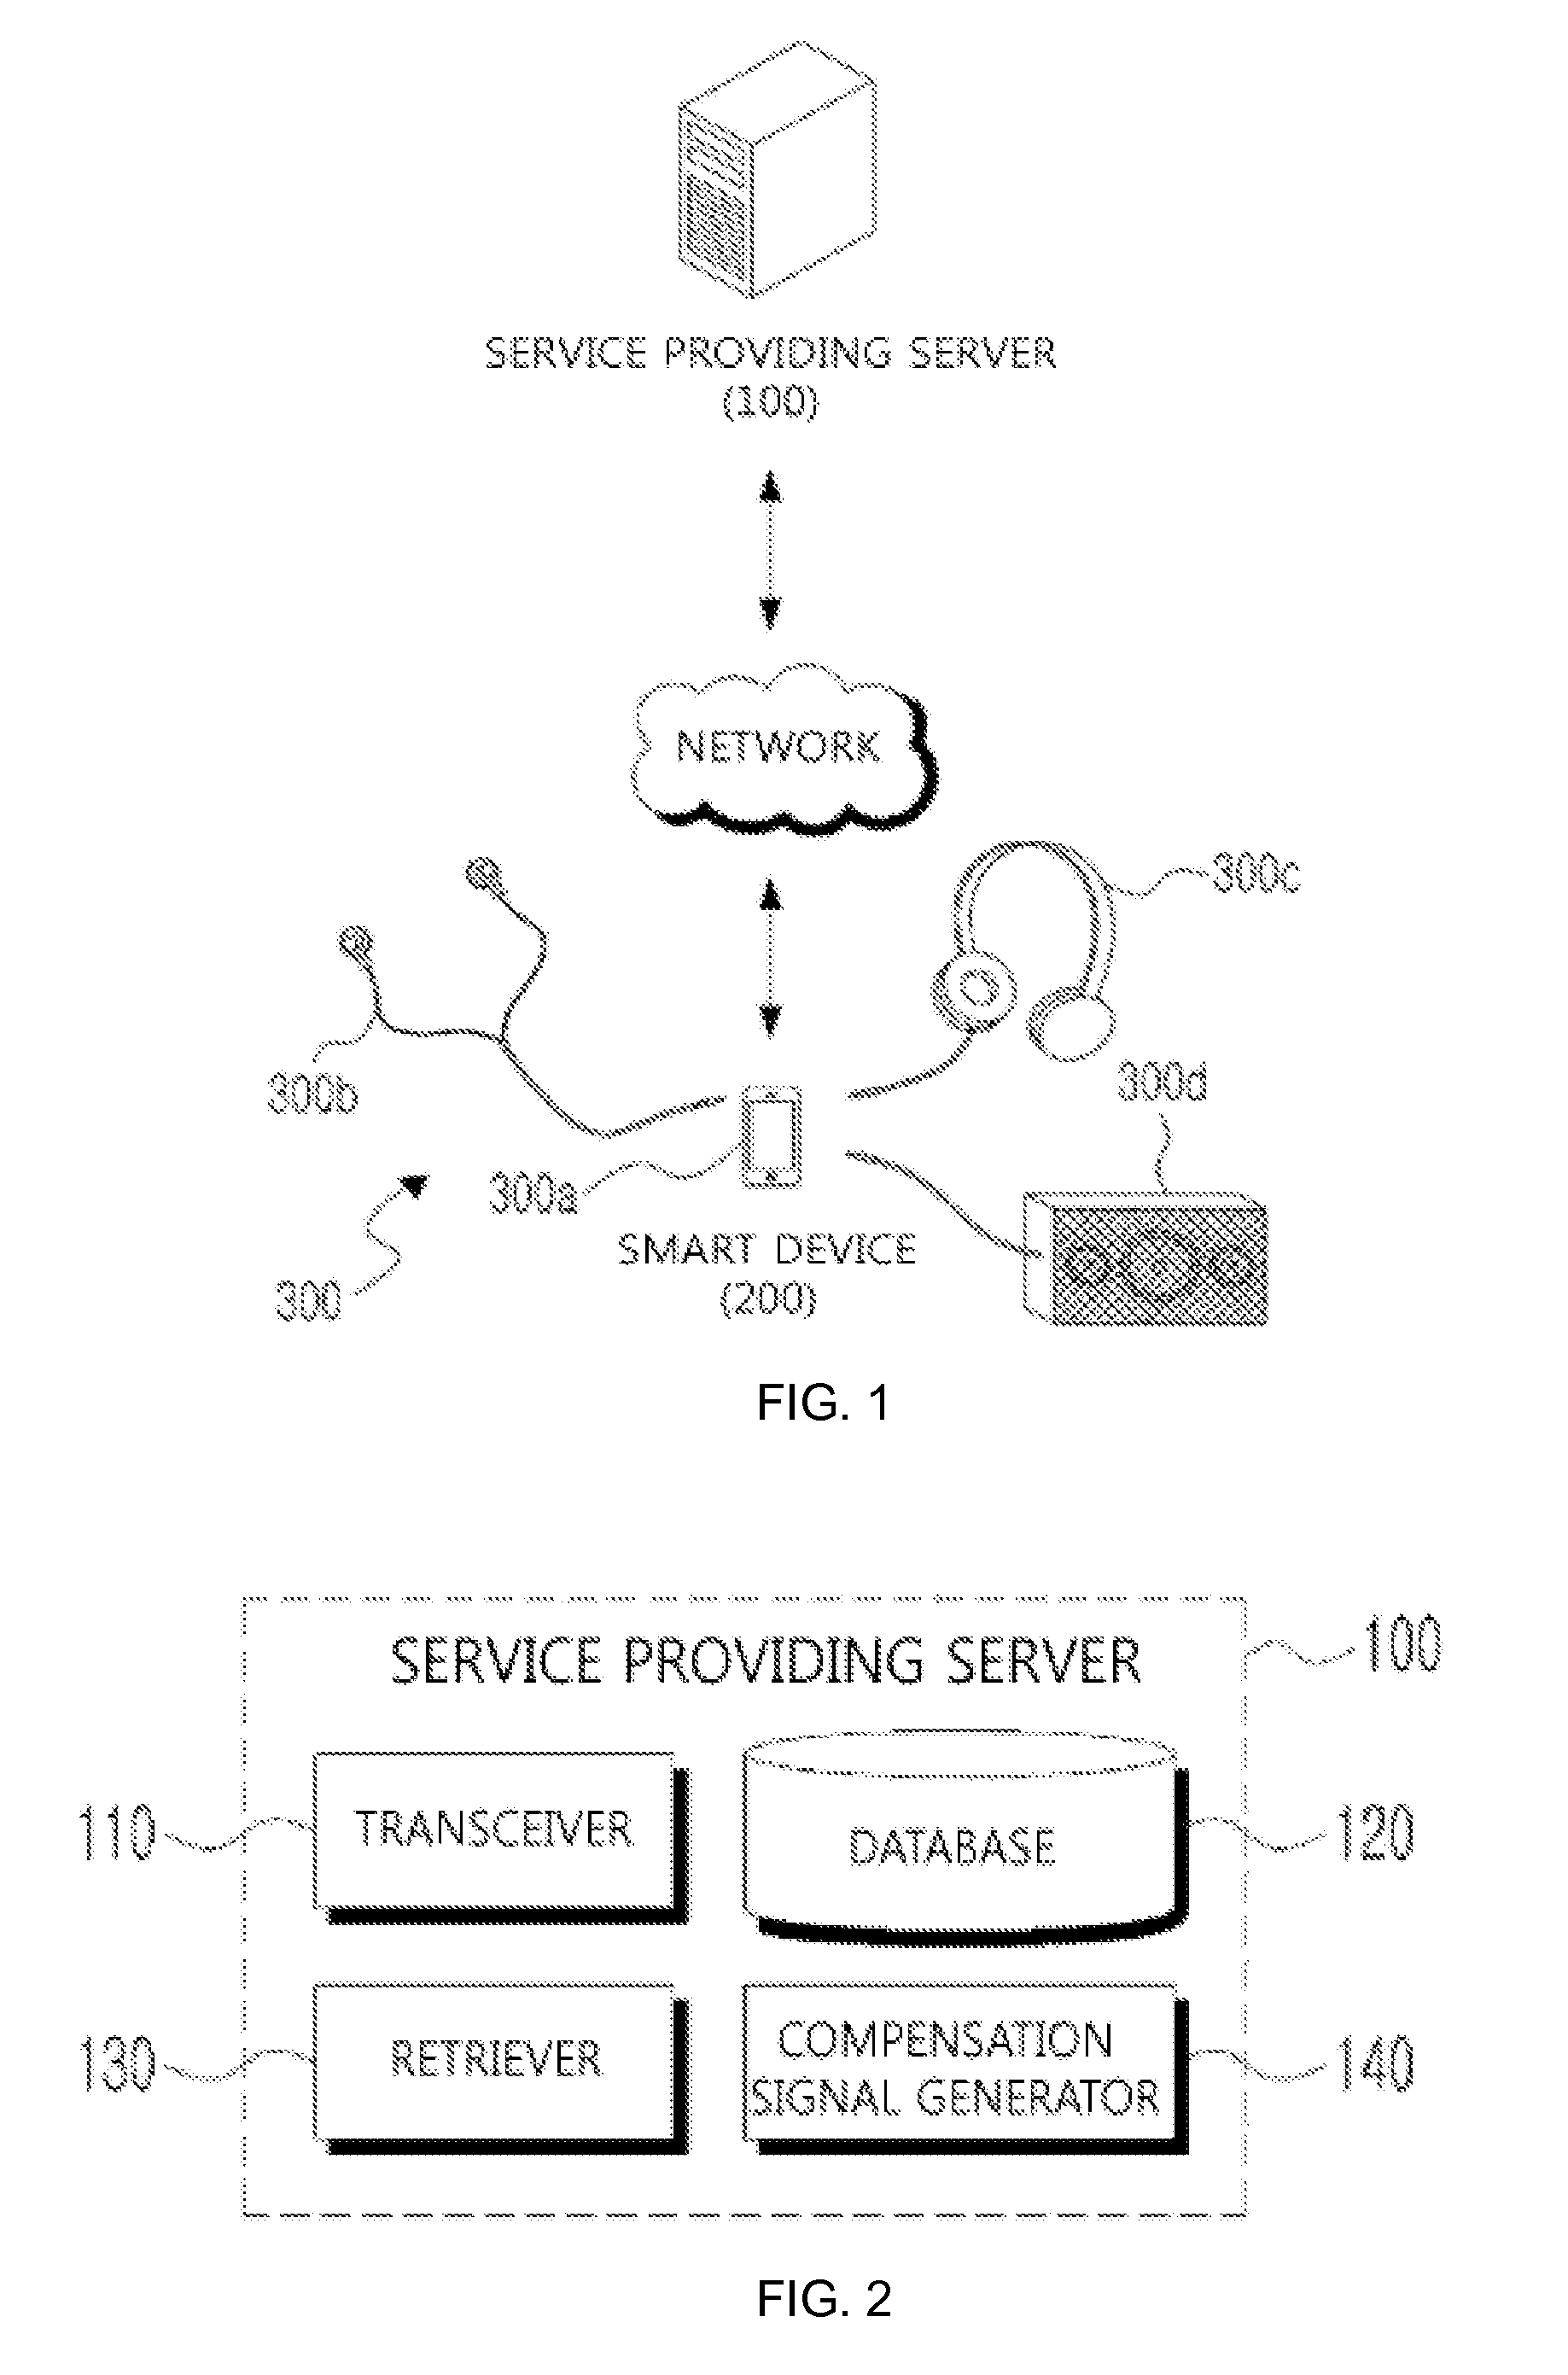 Method for providing a compensation service for characteristics of an audio device using a smart device